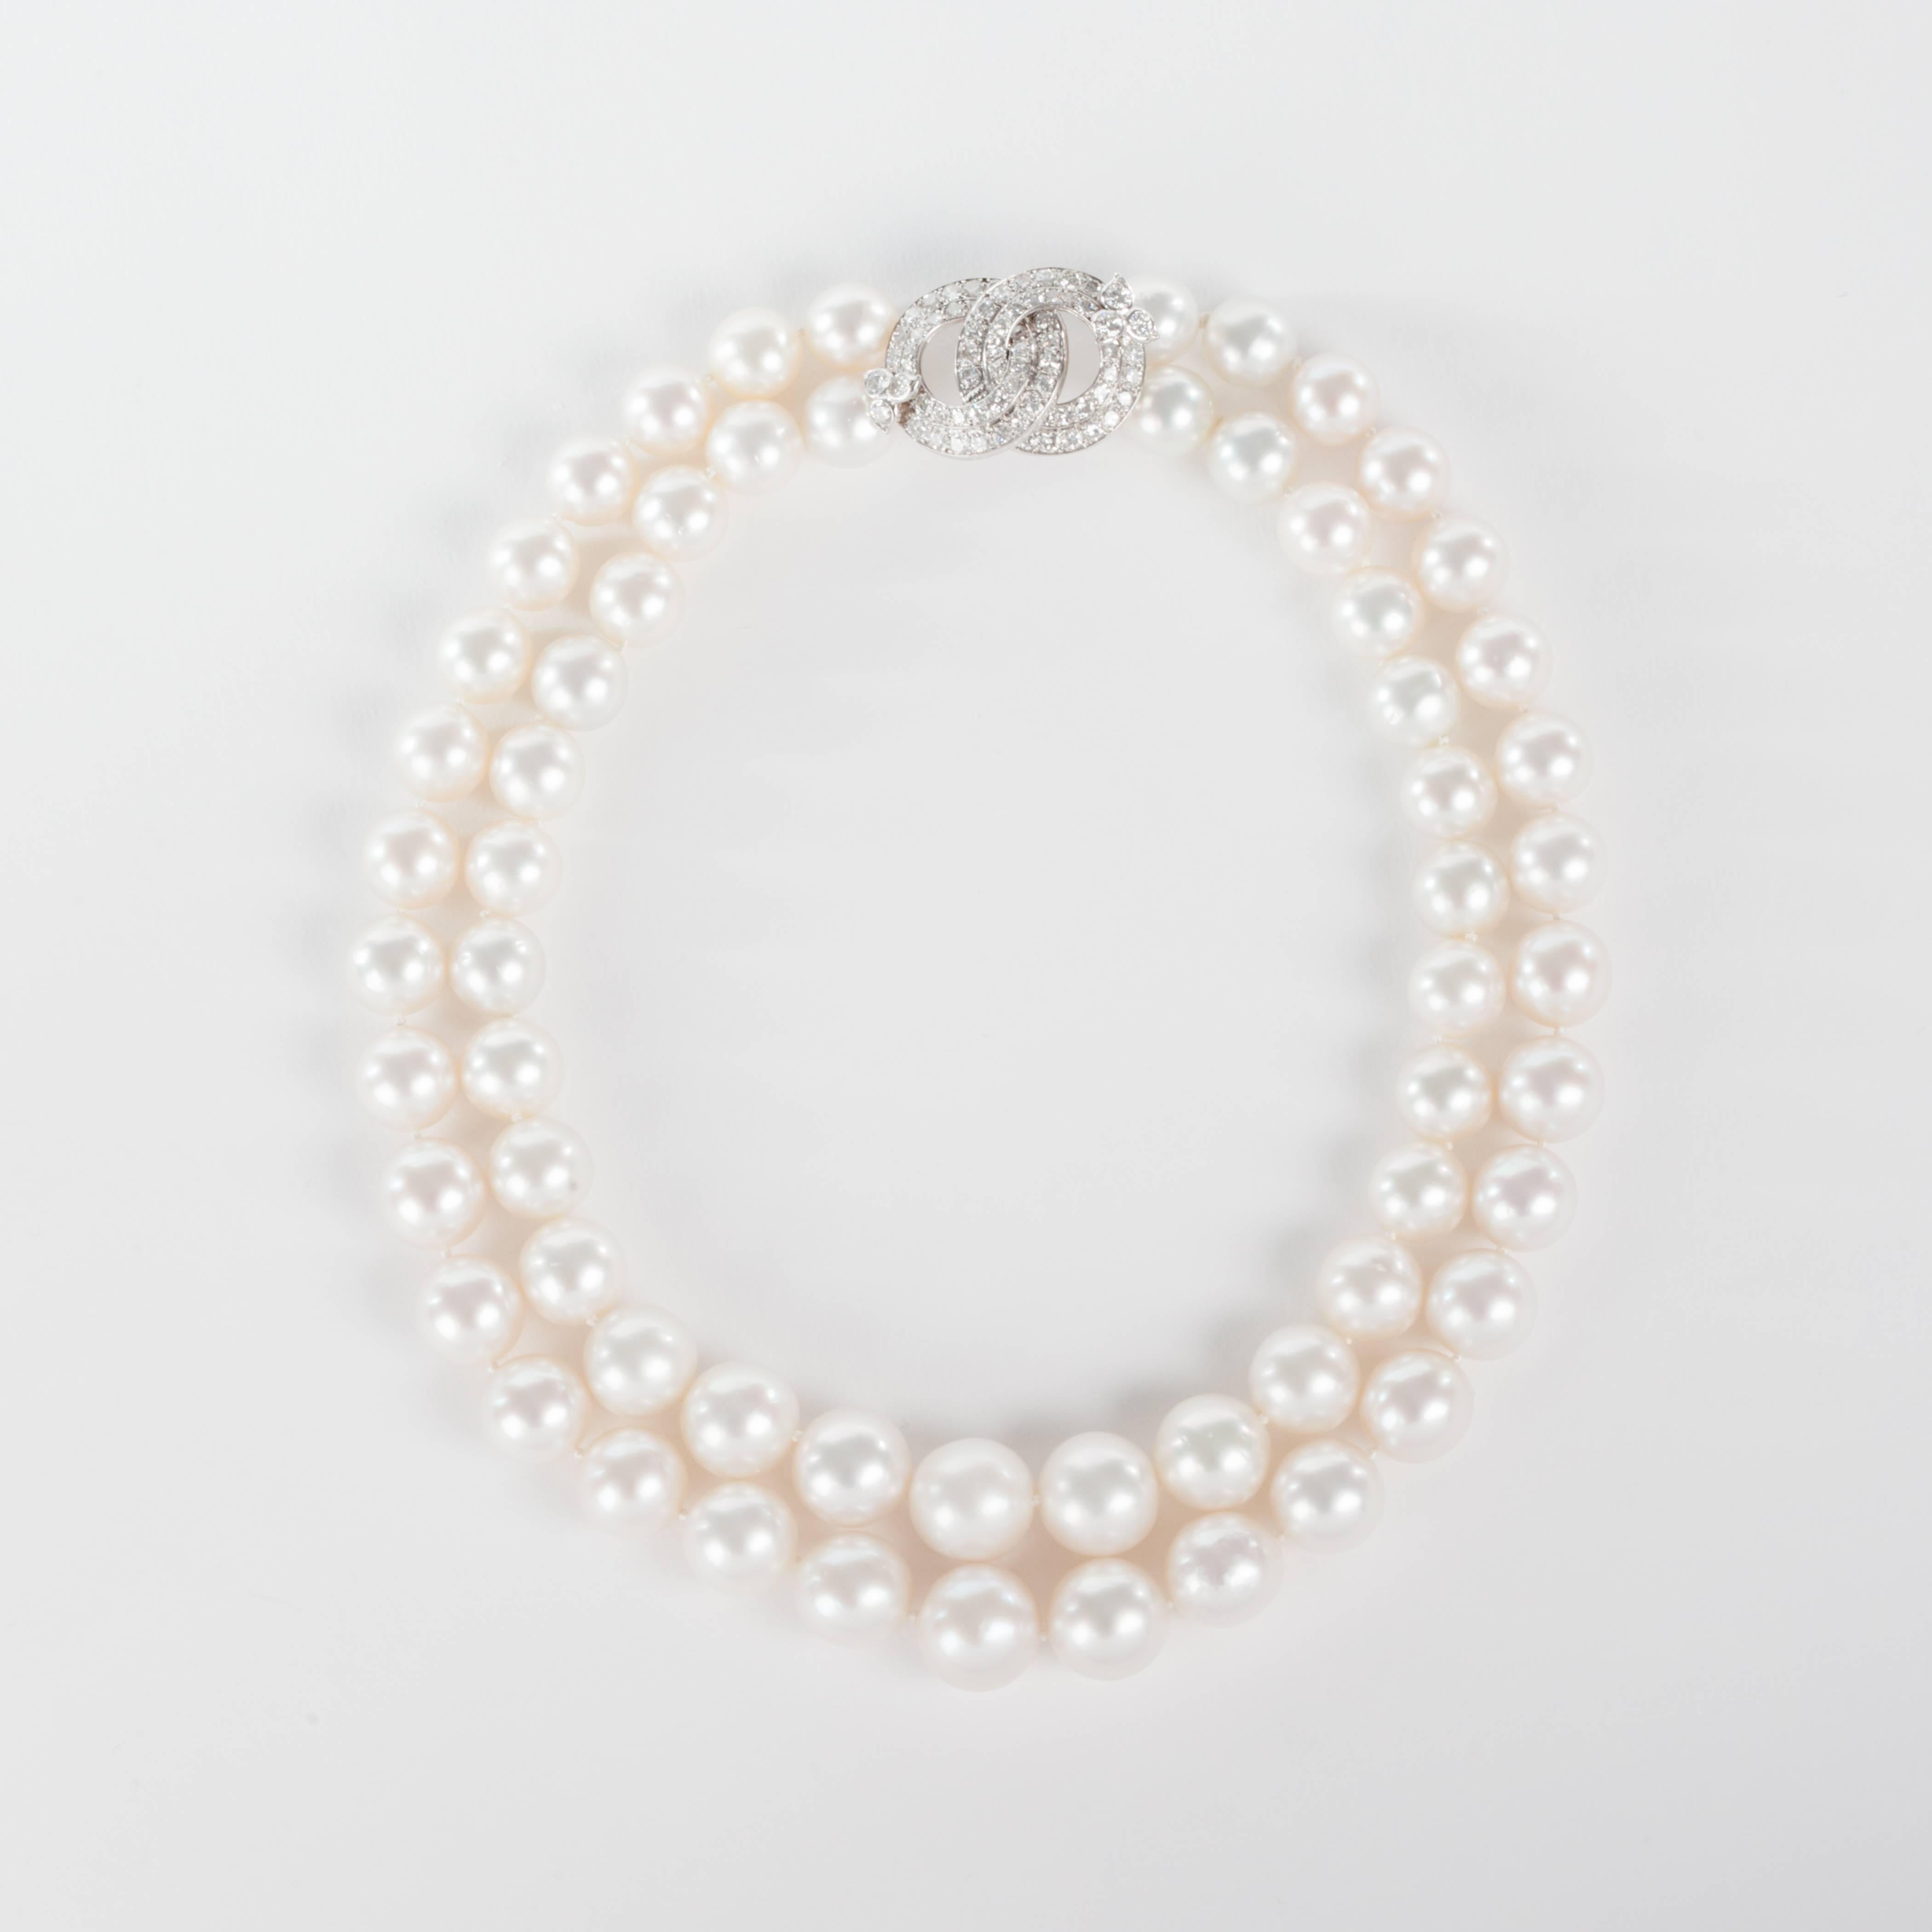 Stunning Diamond Pearl south sea necklace double row 
signed on the claps full pavé diamonds van cleef & arpels 
ref:11640
Platinum 15,38 Grammes
5 carats of diamonds 
pearl size 14 to 19 mm
circa 1960